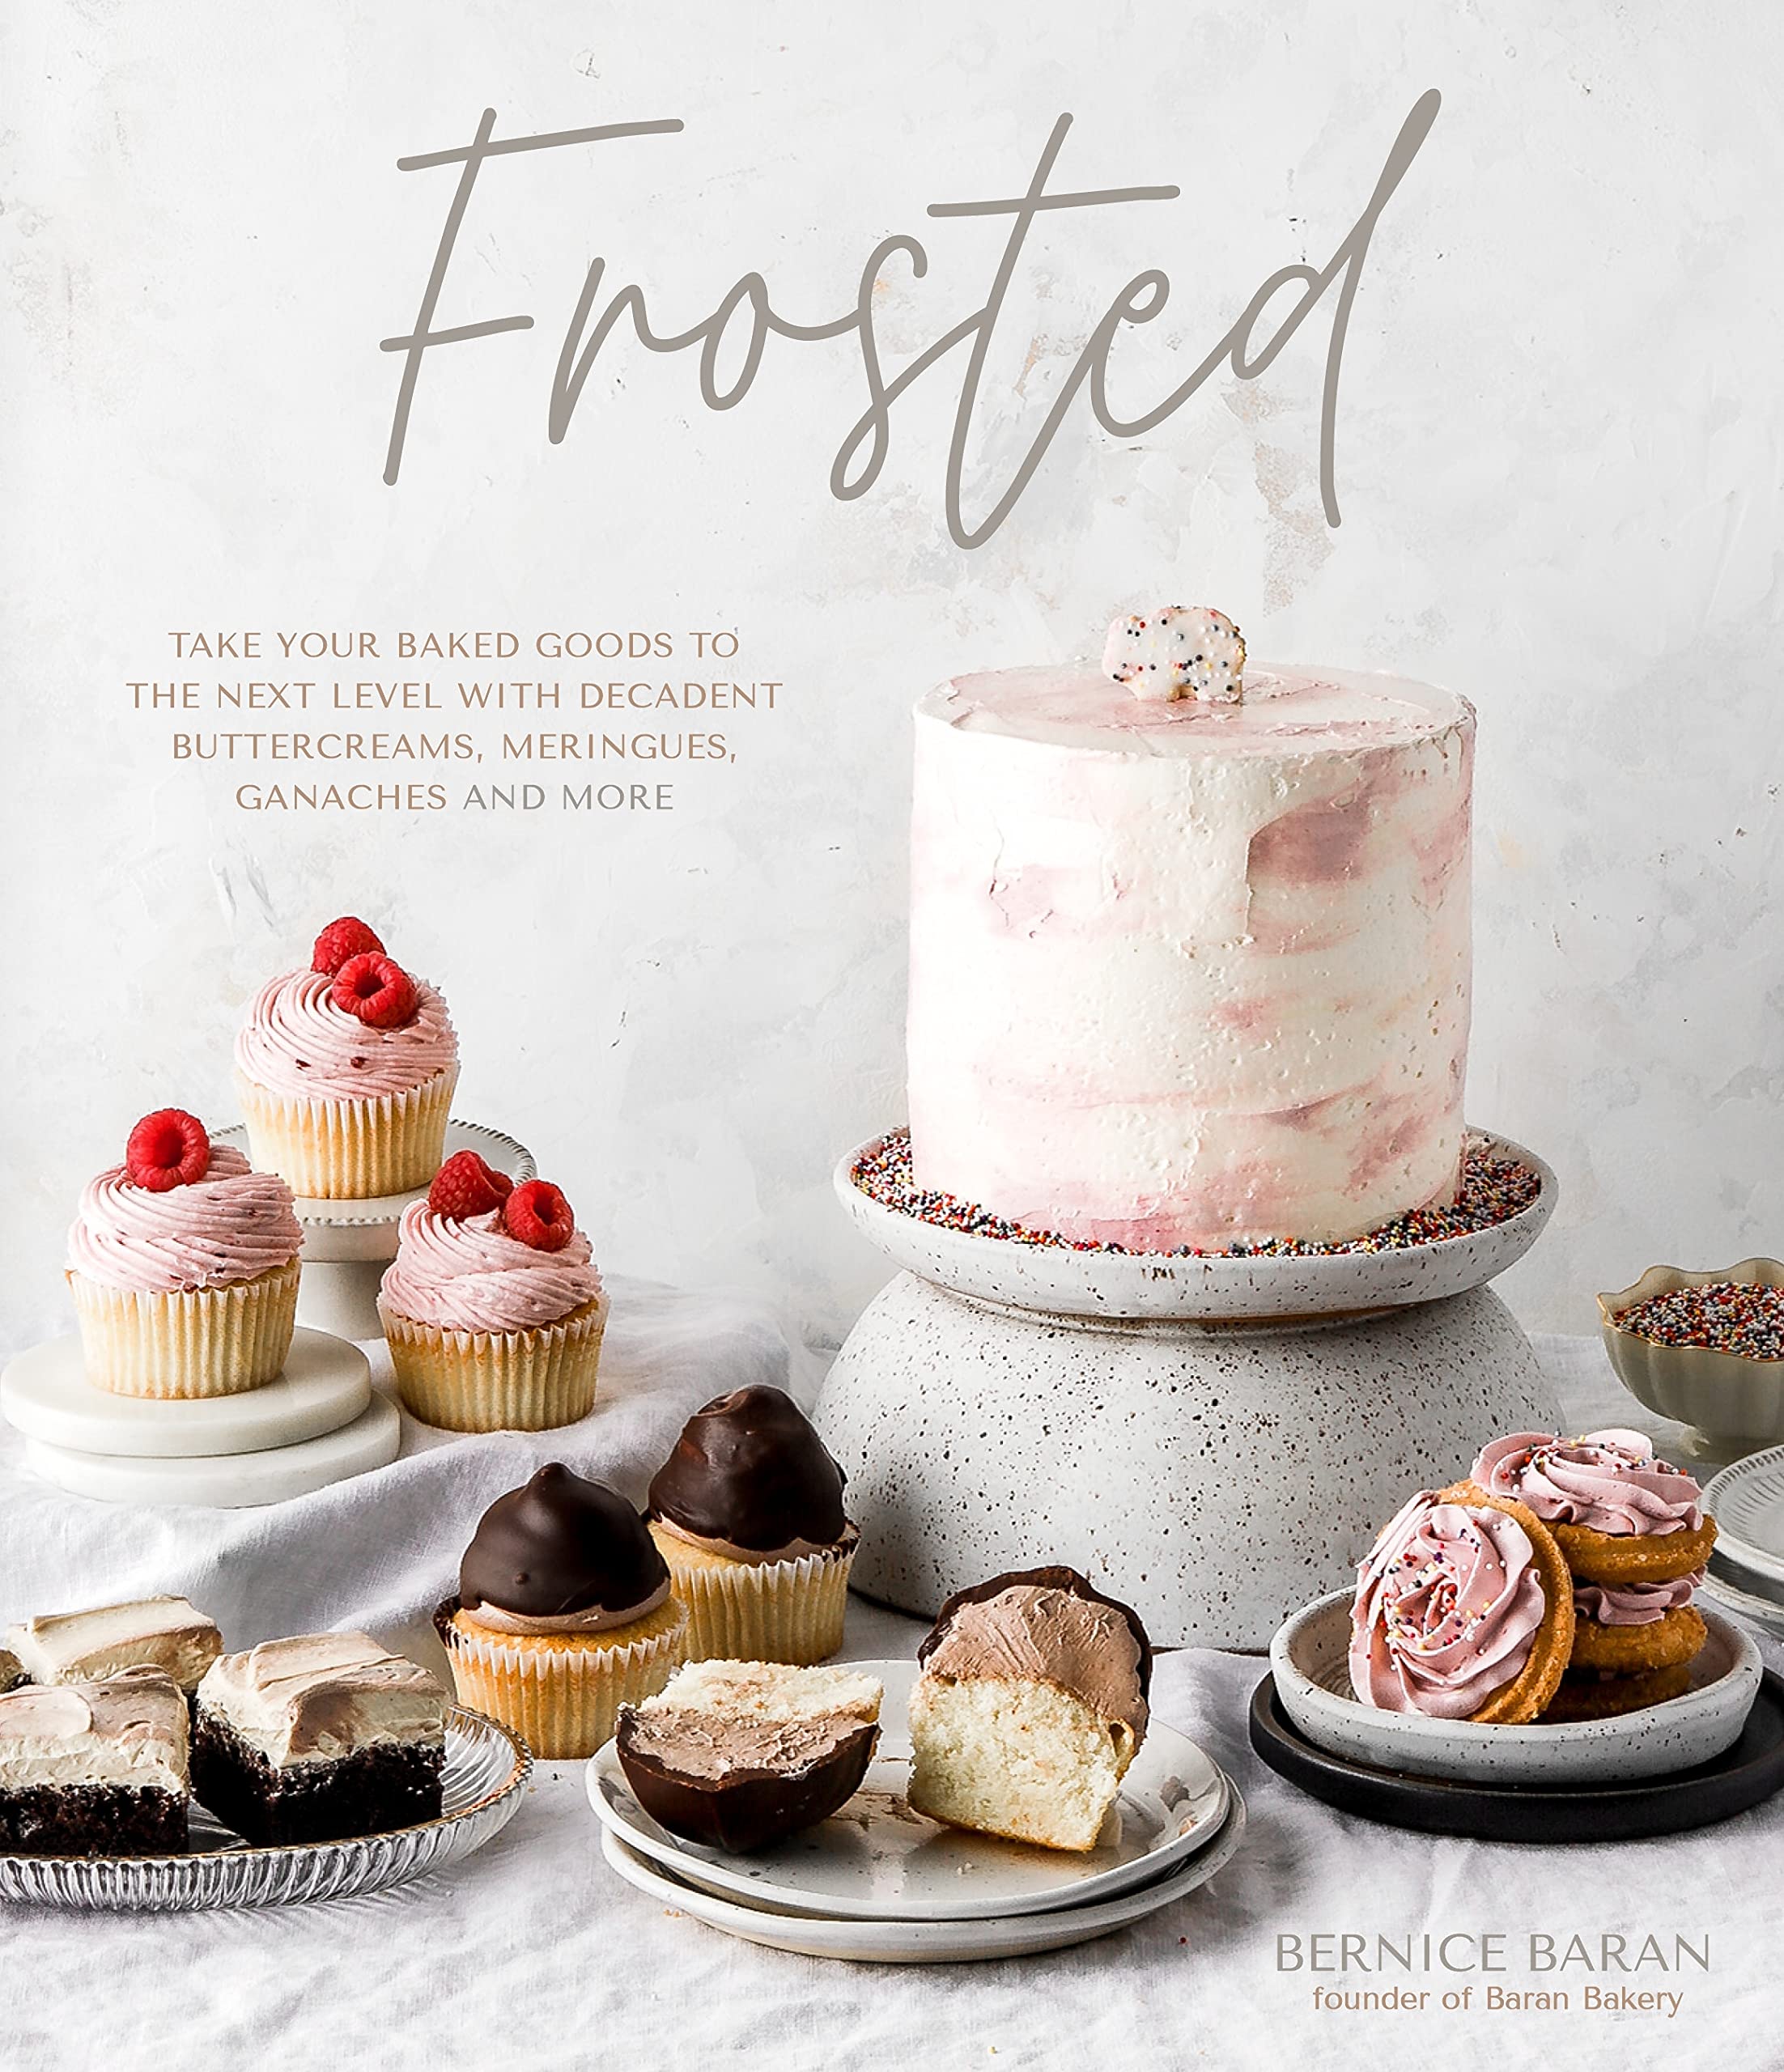 Frosted: Take Your Baked Goods to the Next Level with Decadent Buttercreams, Meringues, Ganaches and More (Bernice Baran)